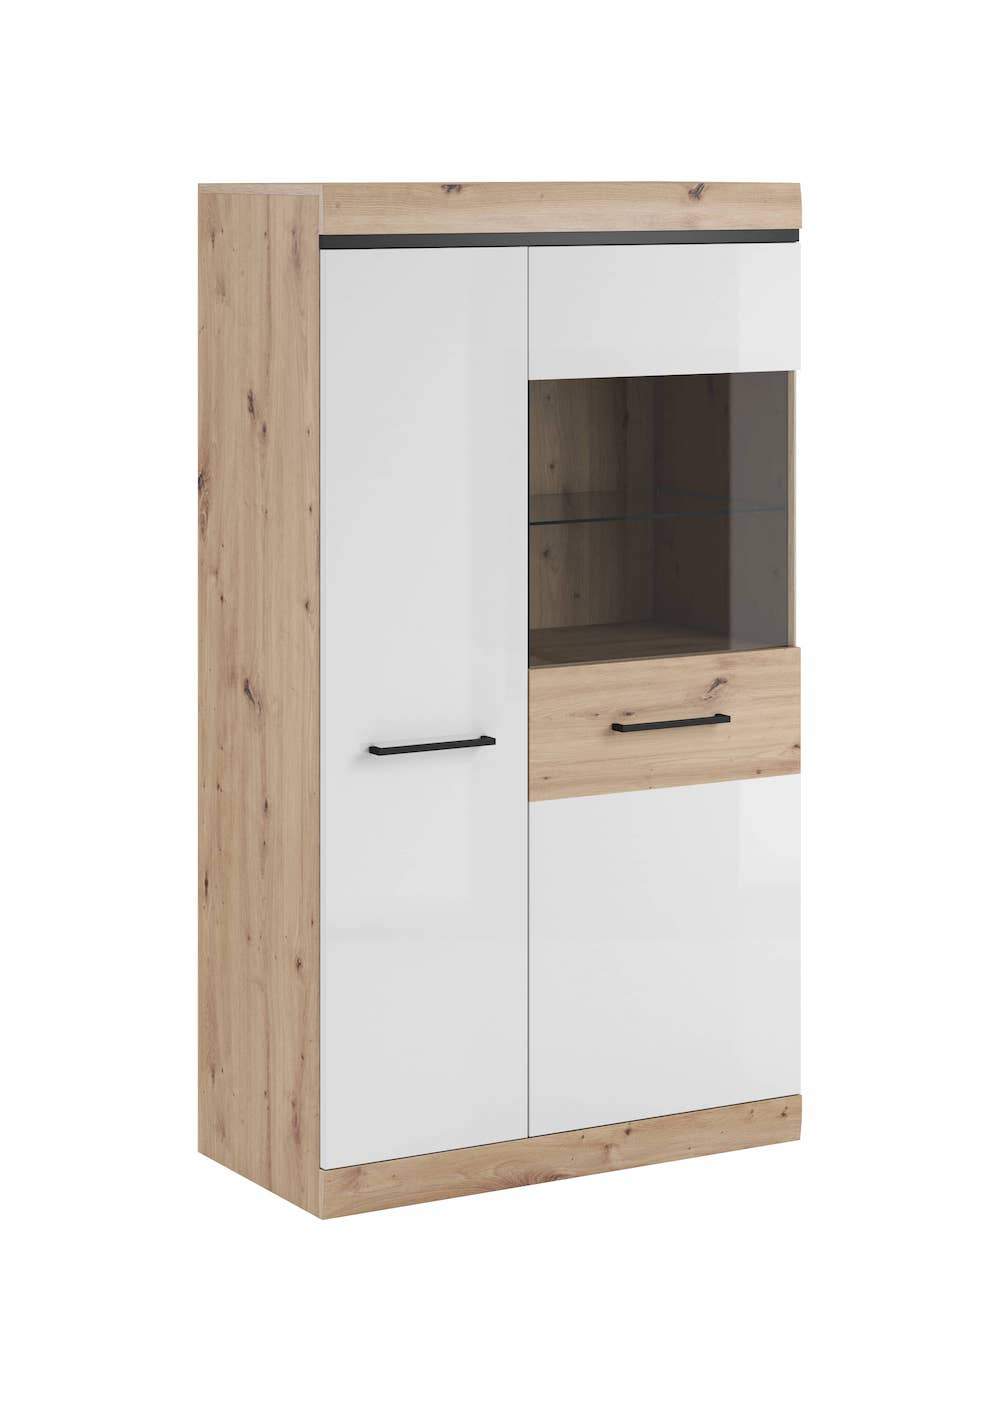 Nelly NL-06 Display Cabinet - £239.4 - Living Display Sideboard Cabinet 